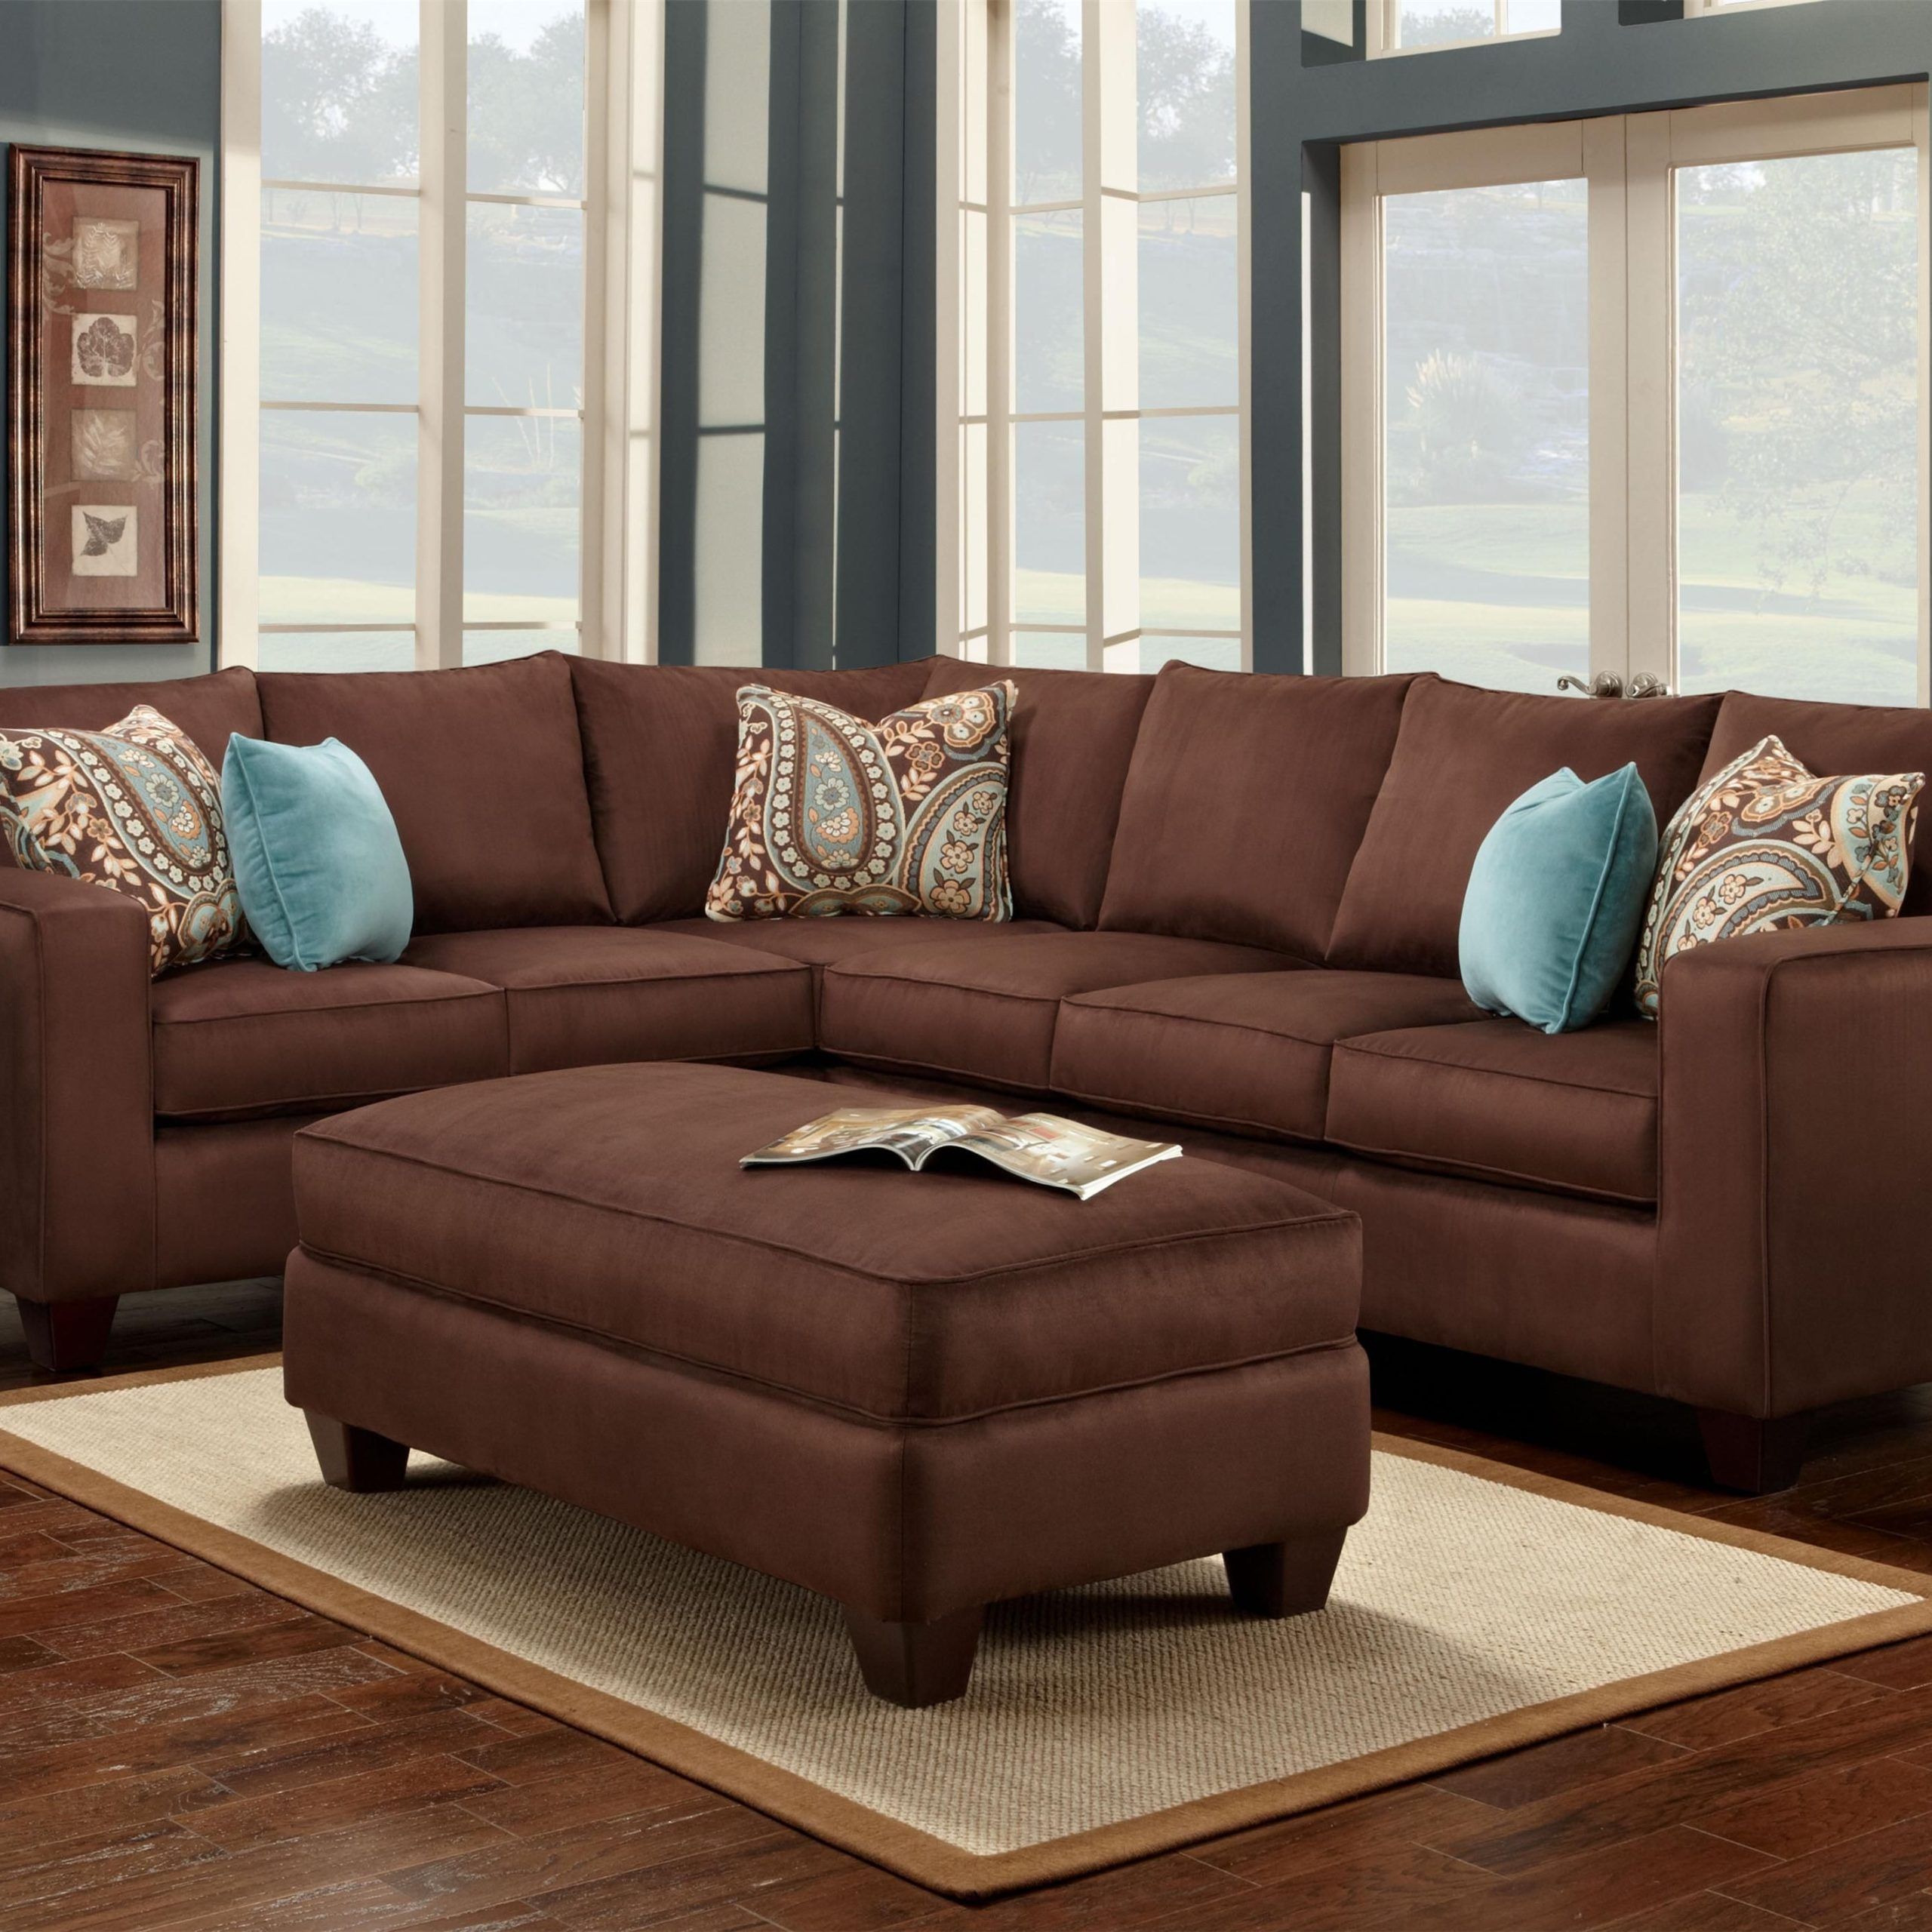 Turquoise Is A Great Accent Color To Chocolate Brown! #accent #pillows #sofa  | Brown Living Room Decor, Brown Couch Living Room, Brown Sofa Living Room Within Sofas In Chocolate Brown (Photo 1 of 15)